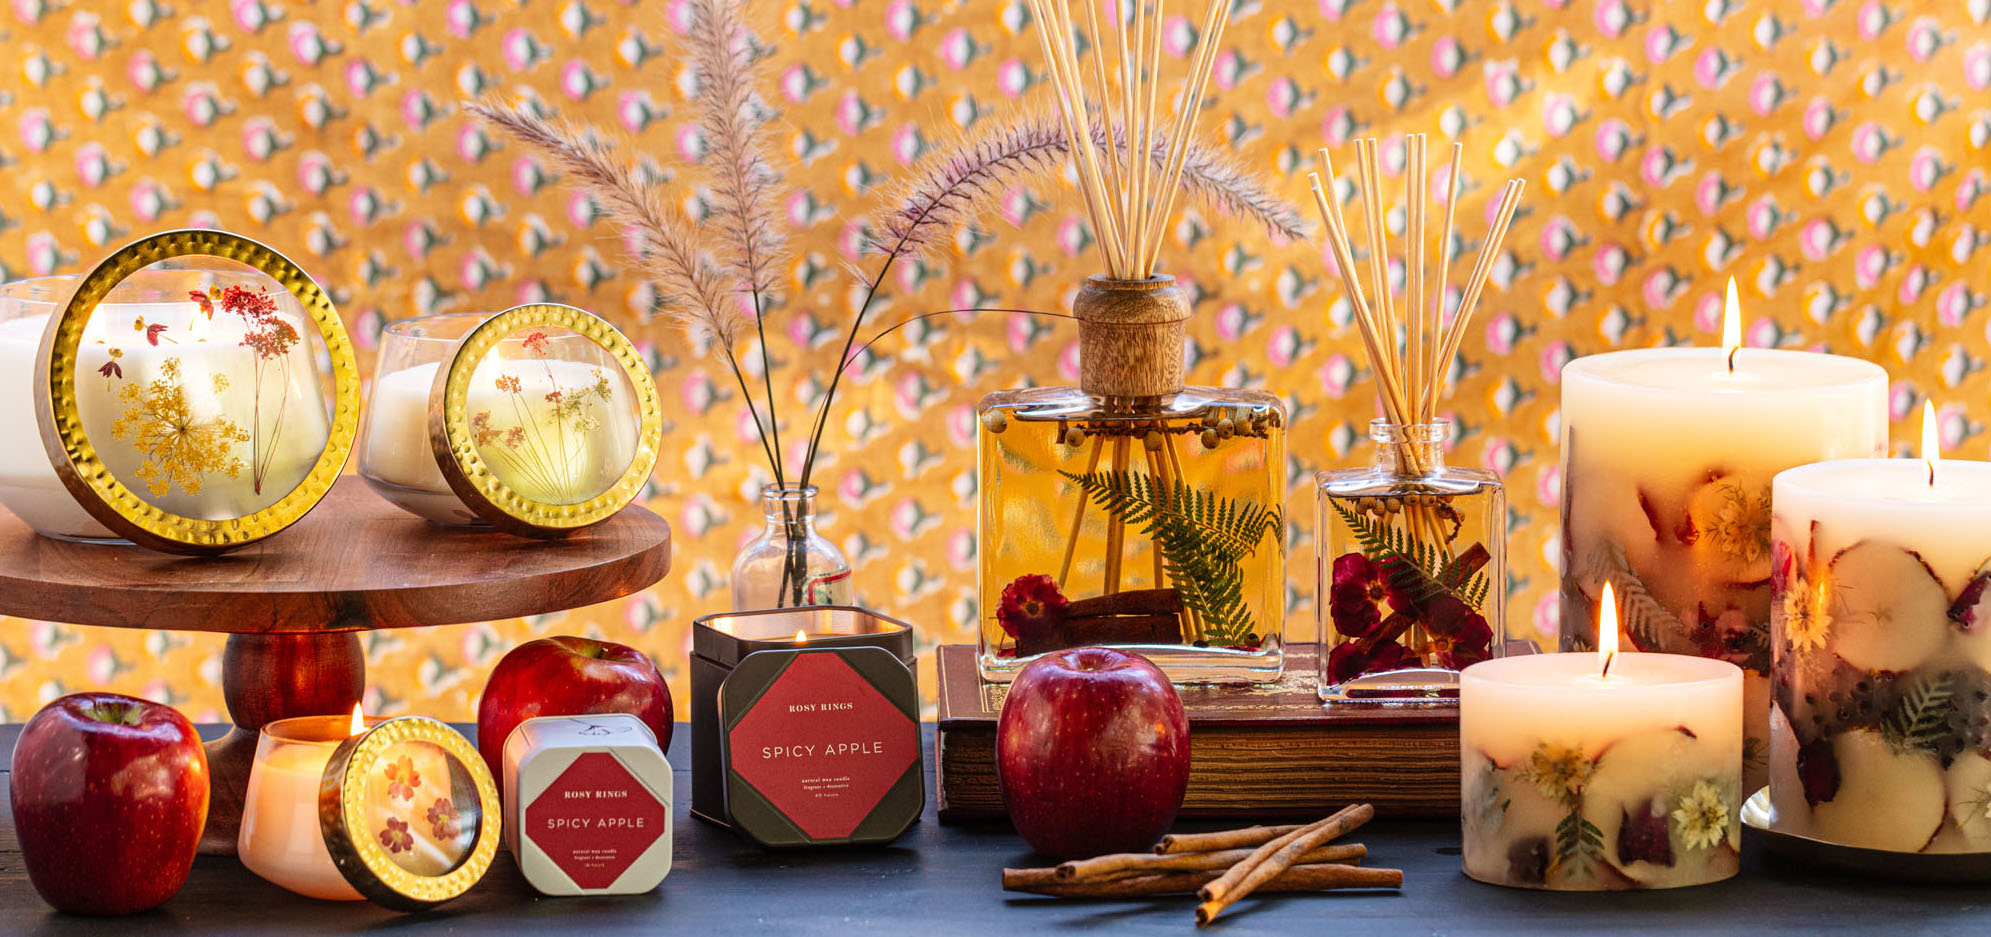 Warm and Spicy Fragrances